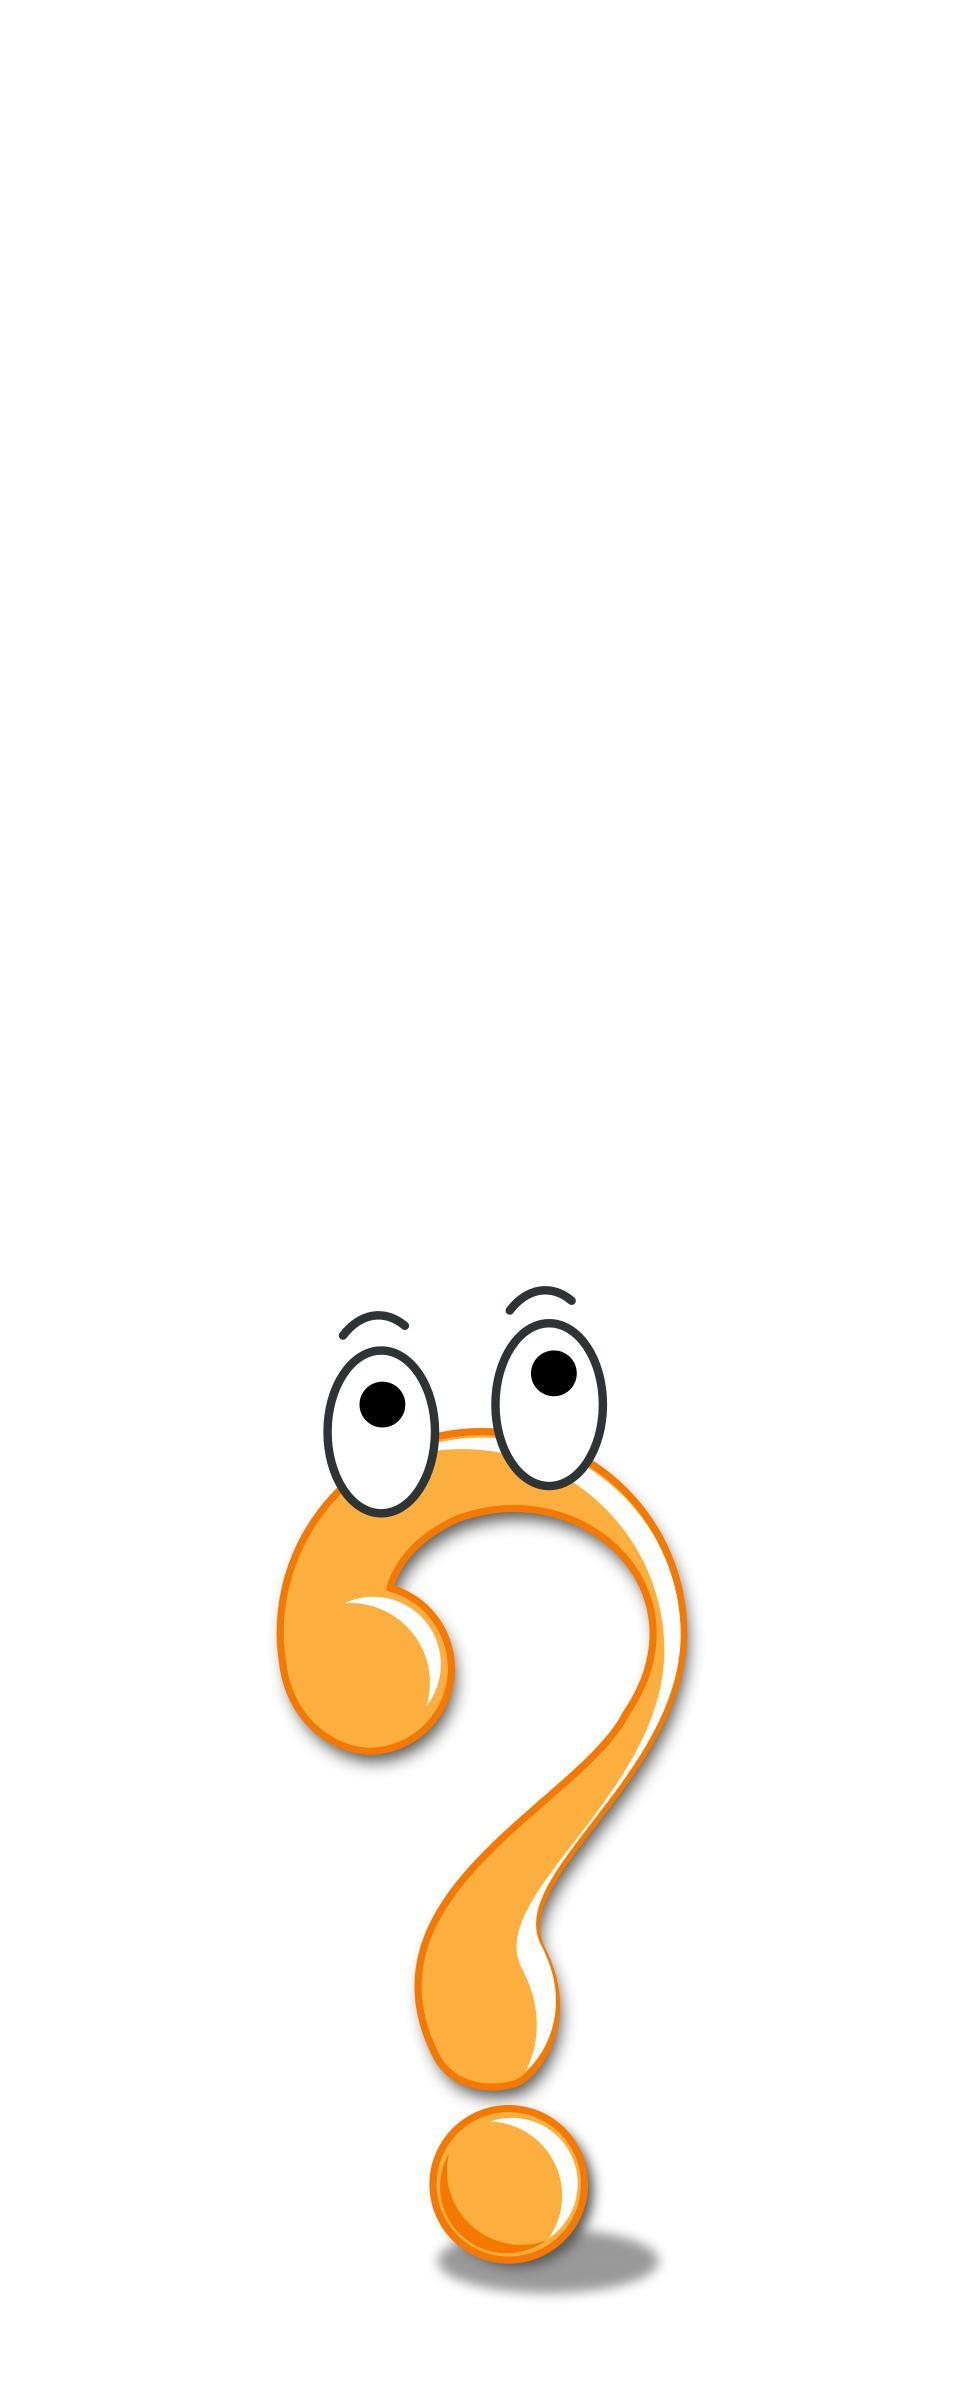 Animation Bouncy Question Mark png transparent